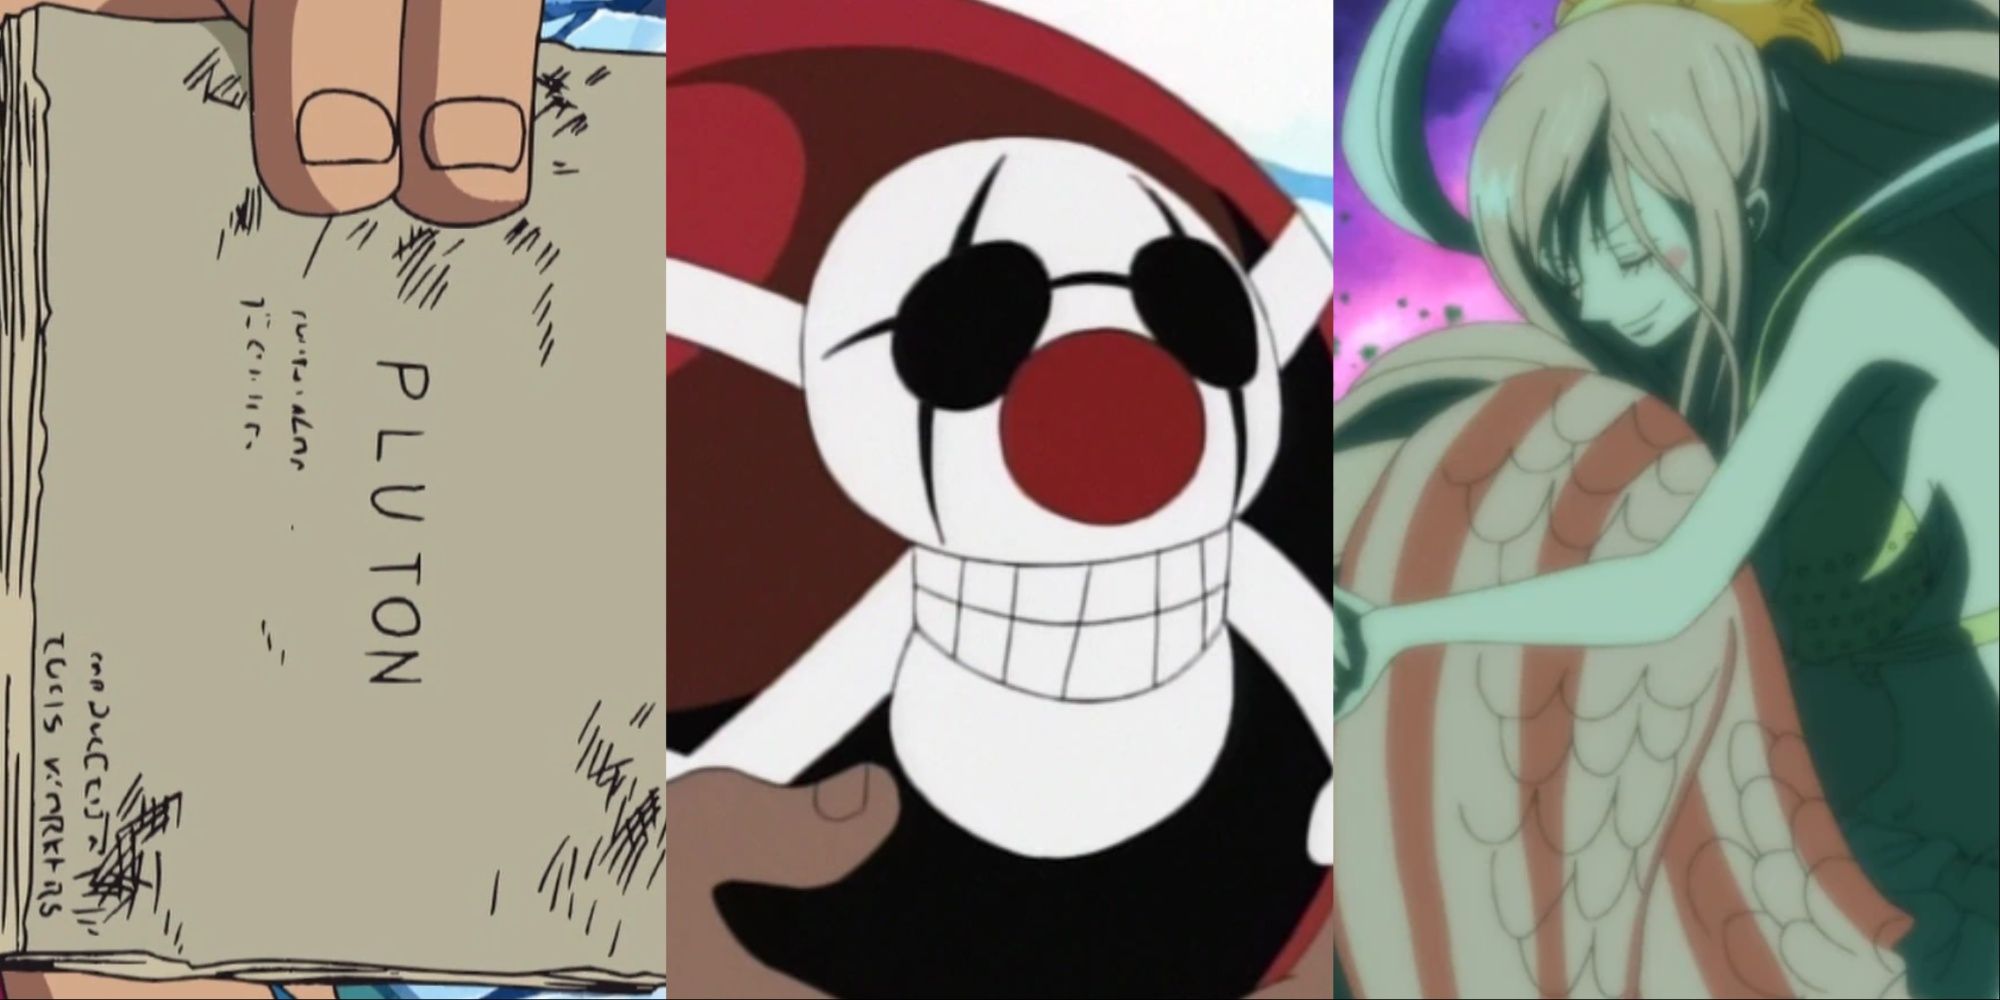 Collage of the Pluton blueprints, a Buggy Ball and Shirahoshi from One Piece.